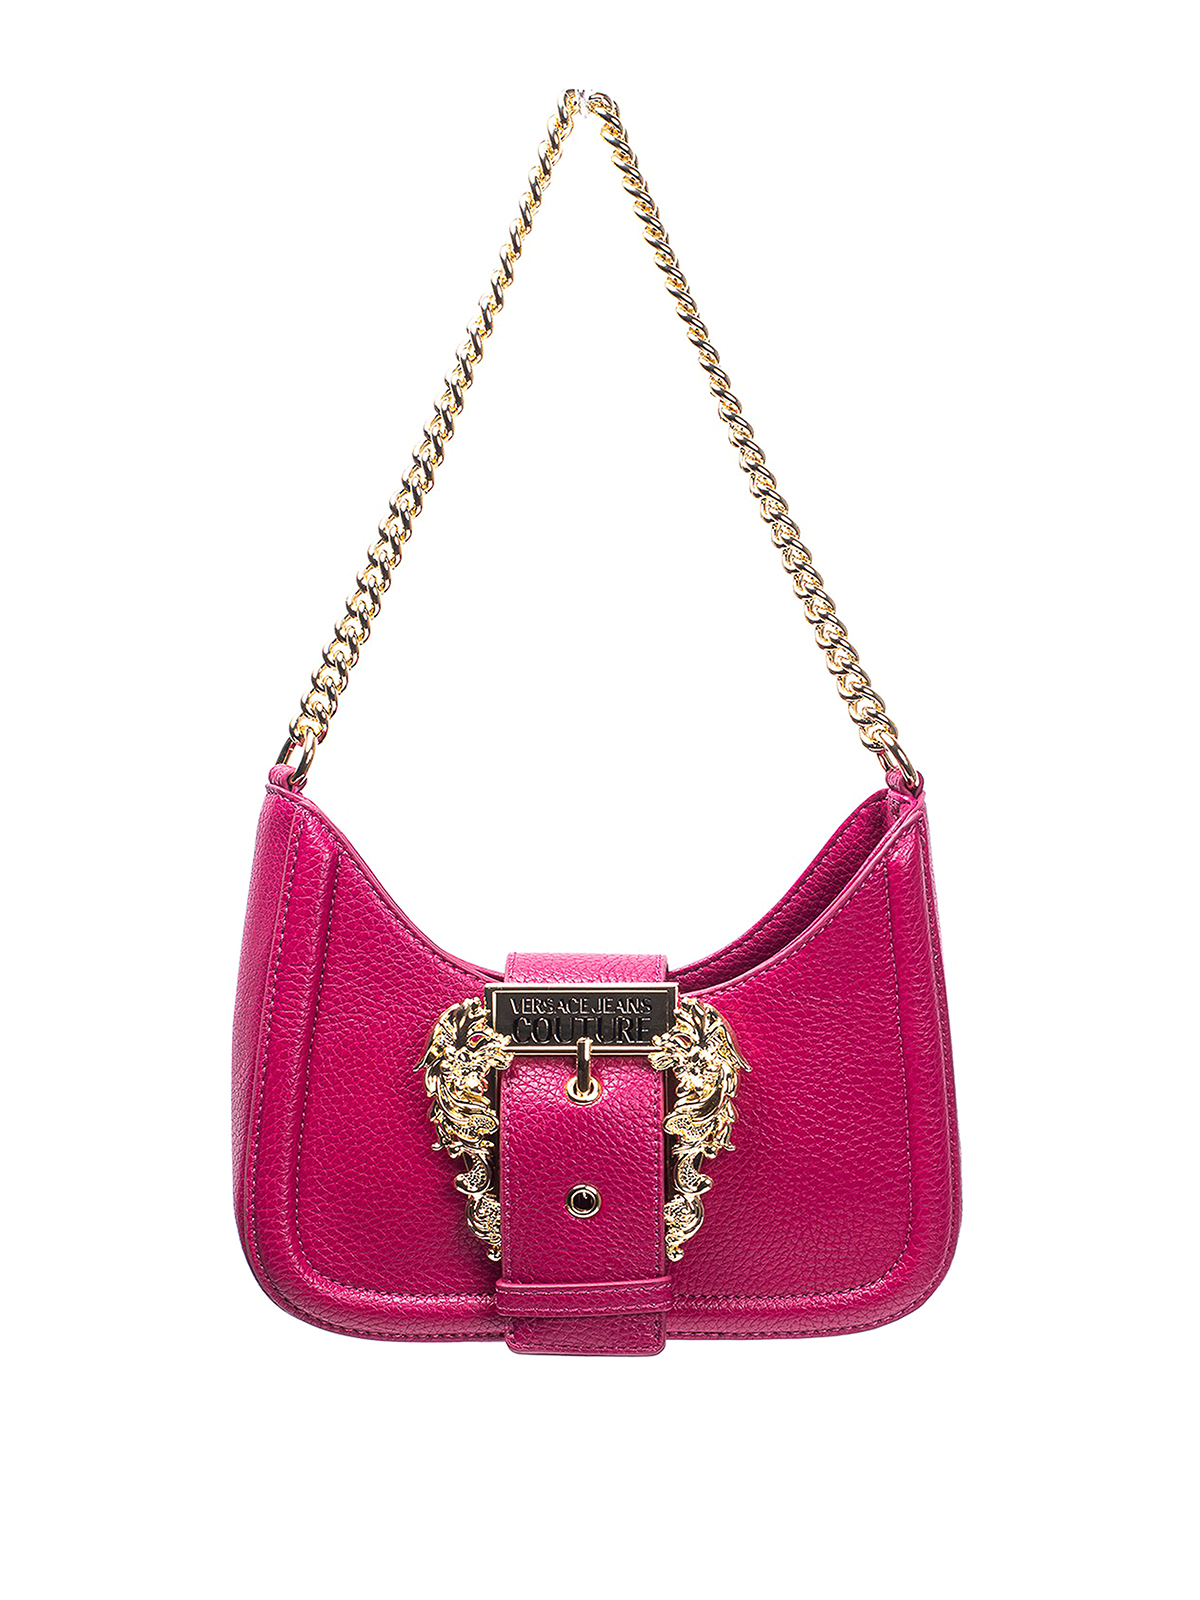 Versace Jeans Couture women's mini bag in imitation leather Magenta